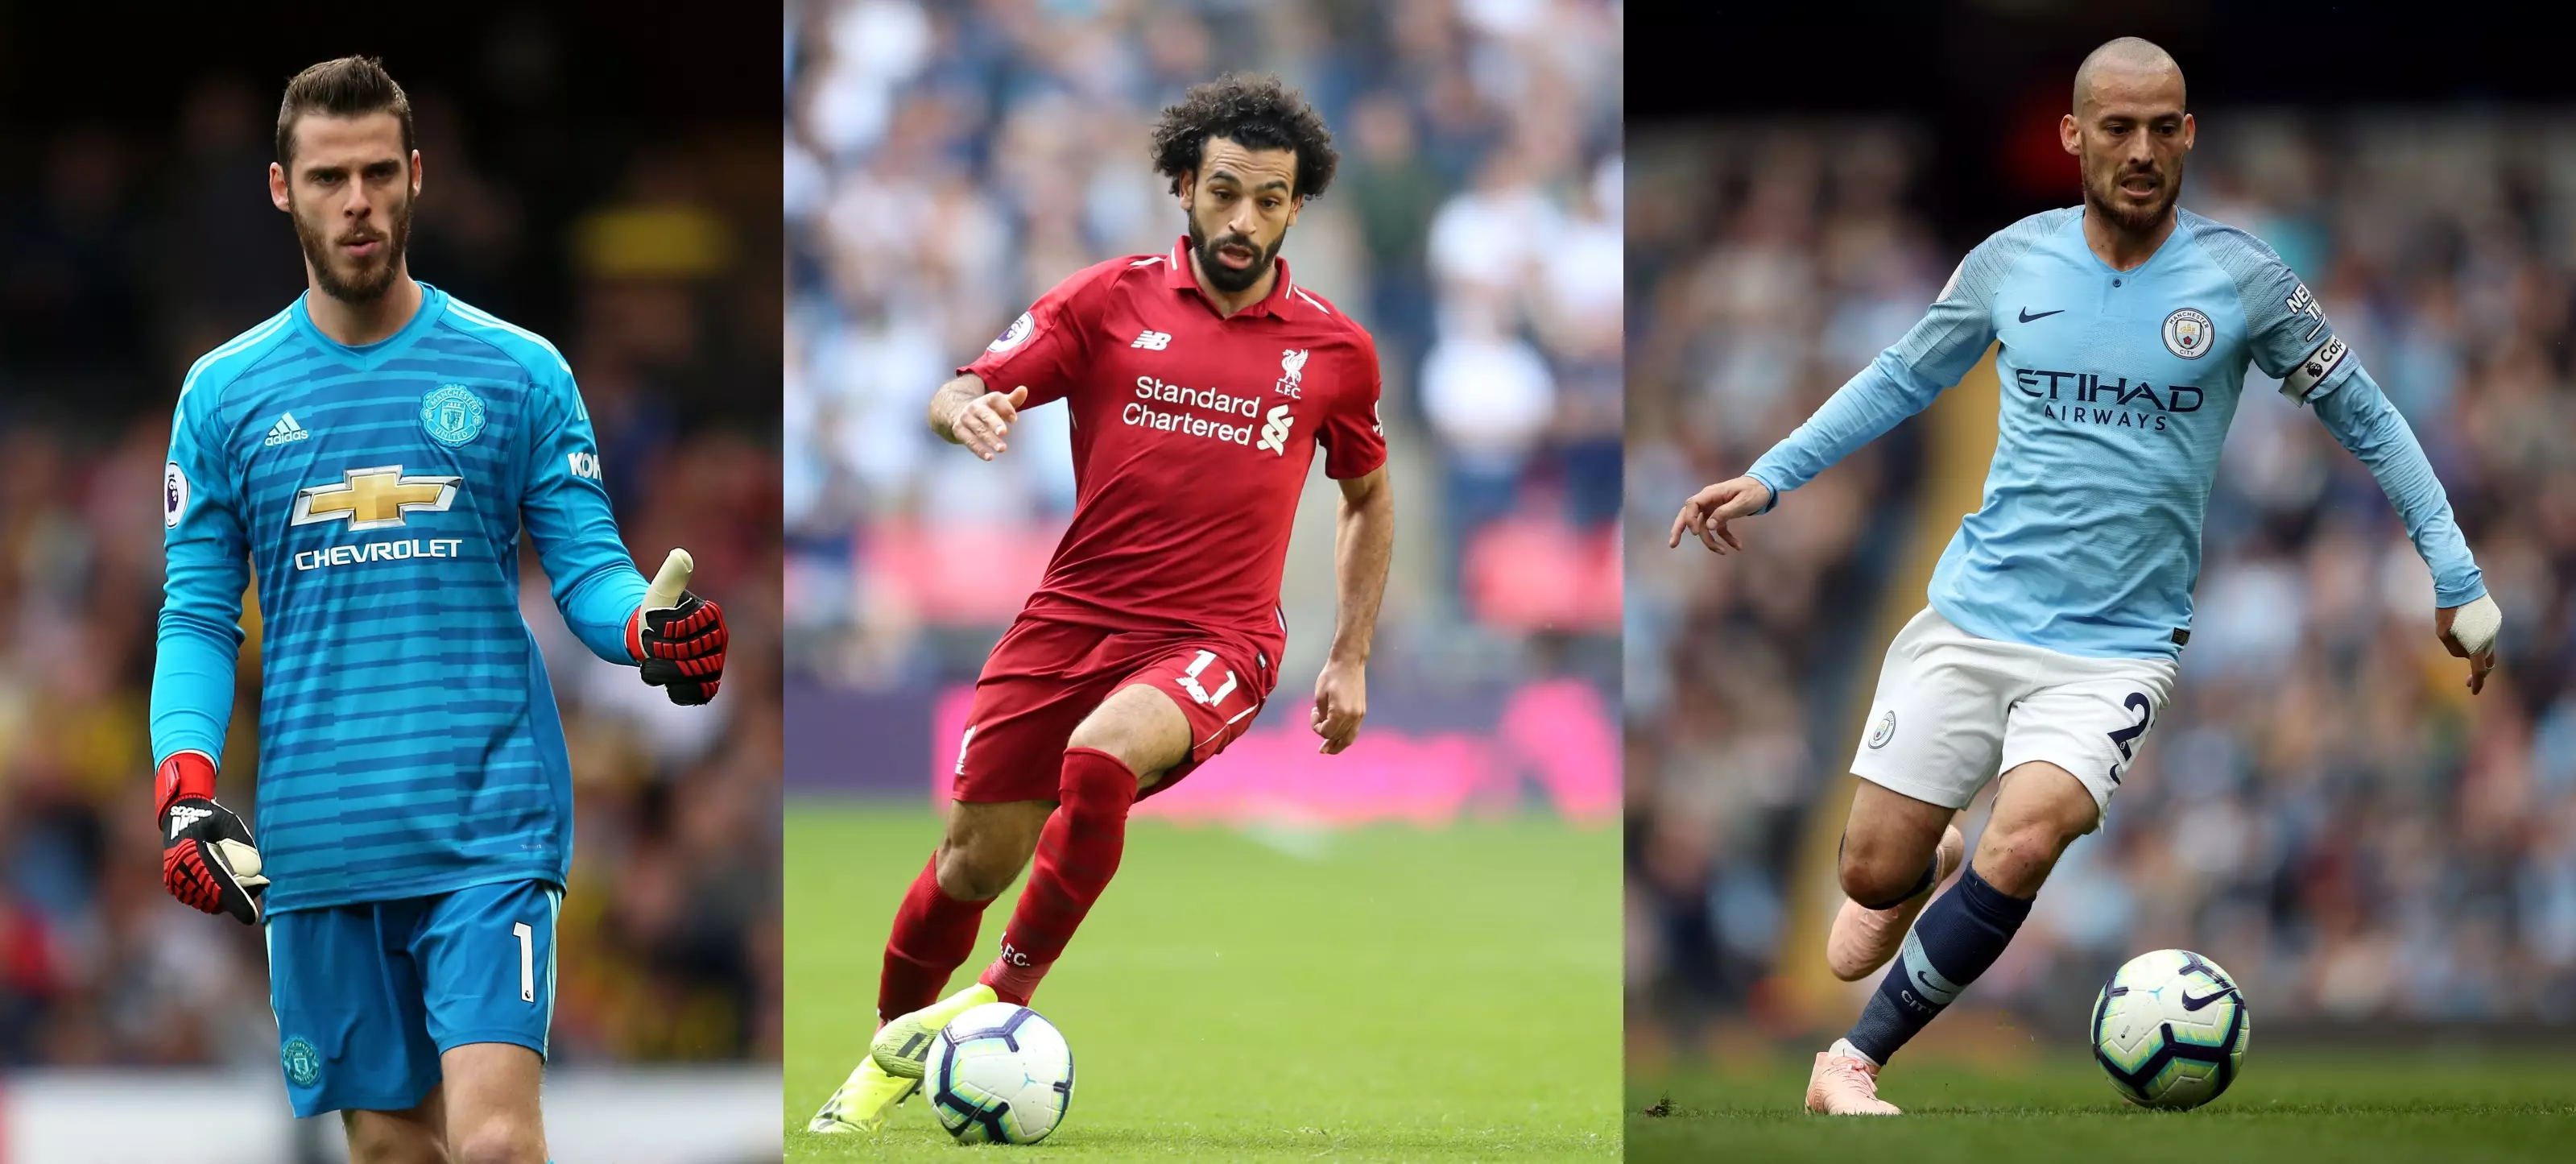 Carragher Picks His Choice For Best Player In The Premier League